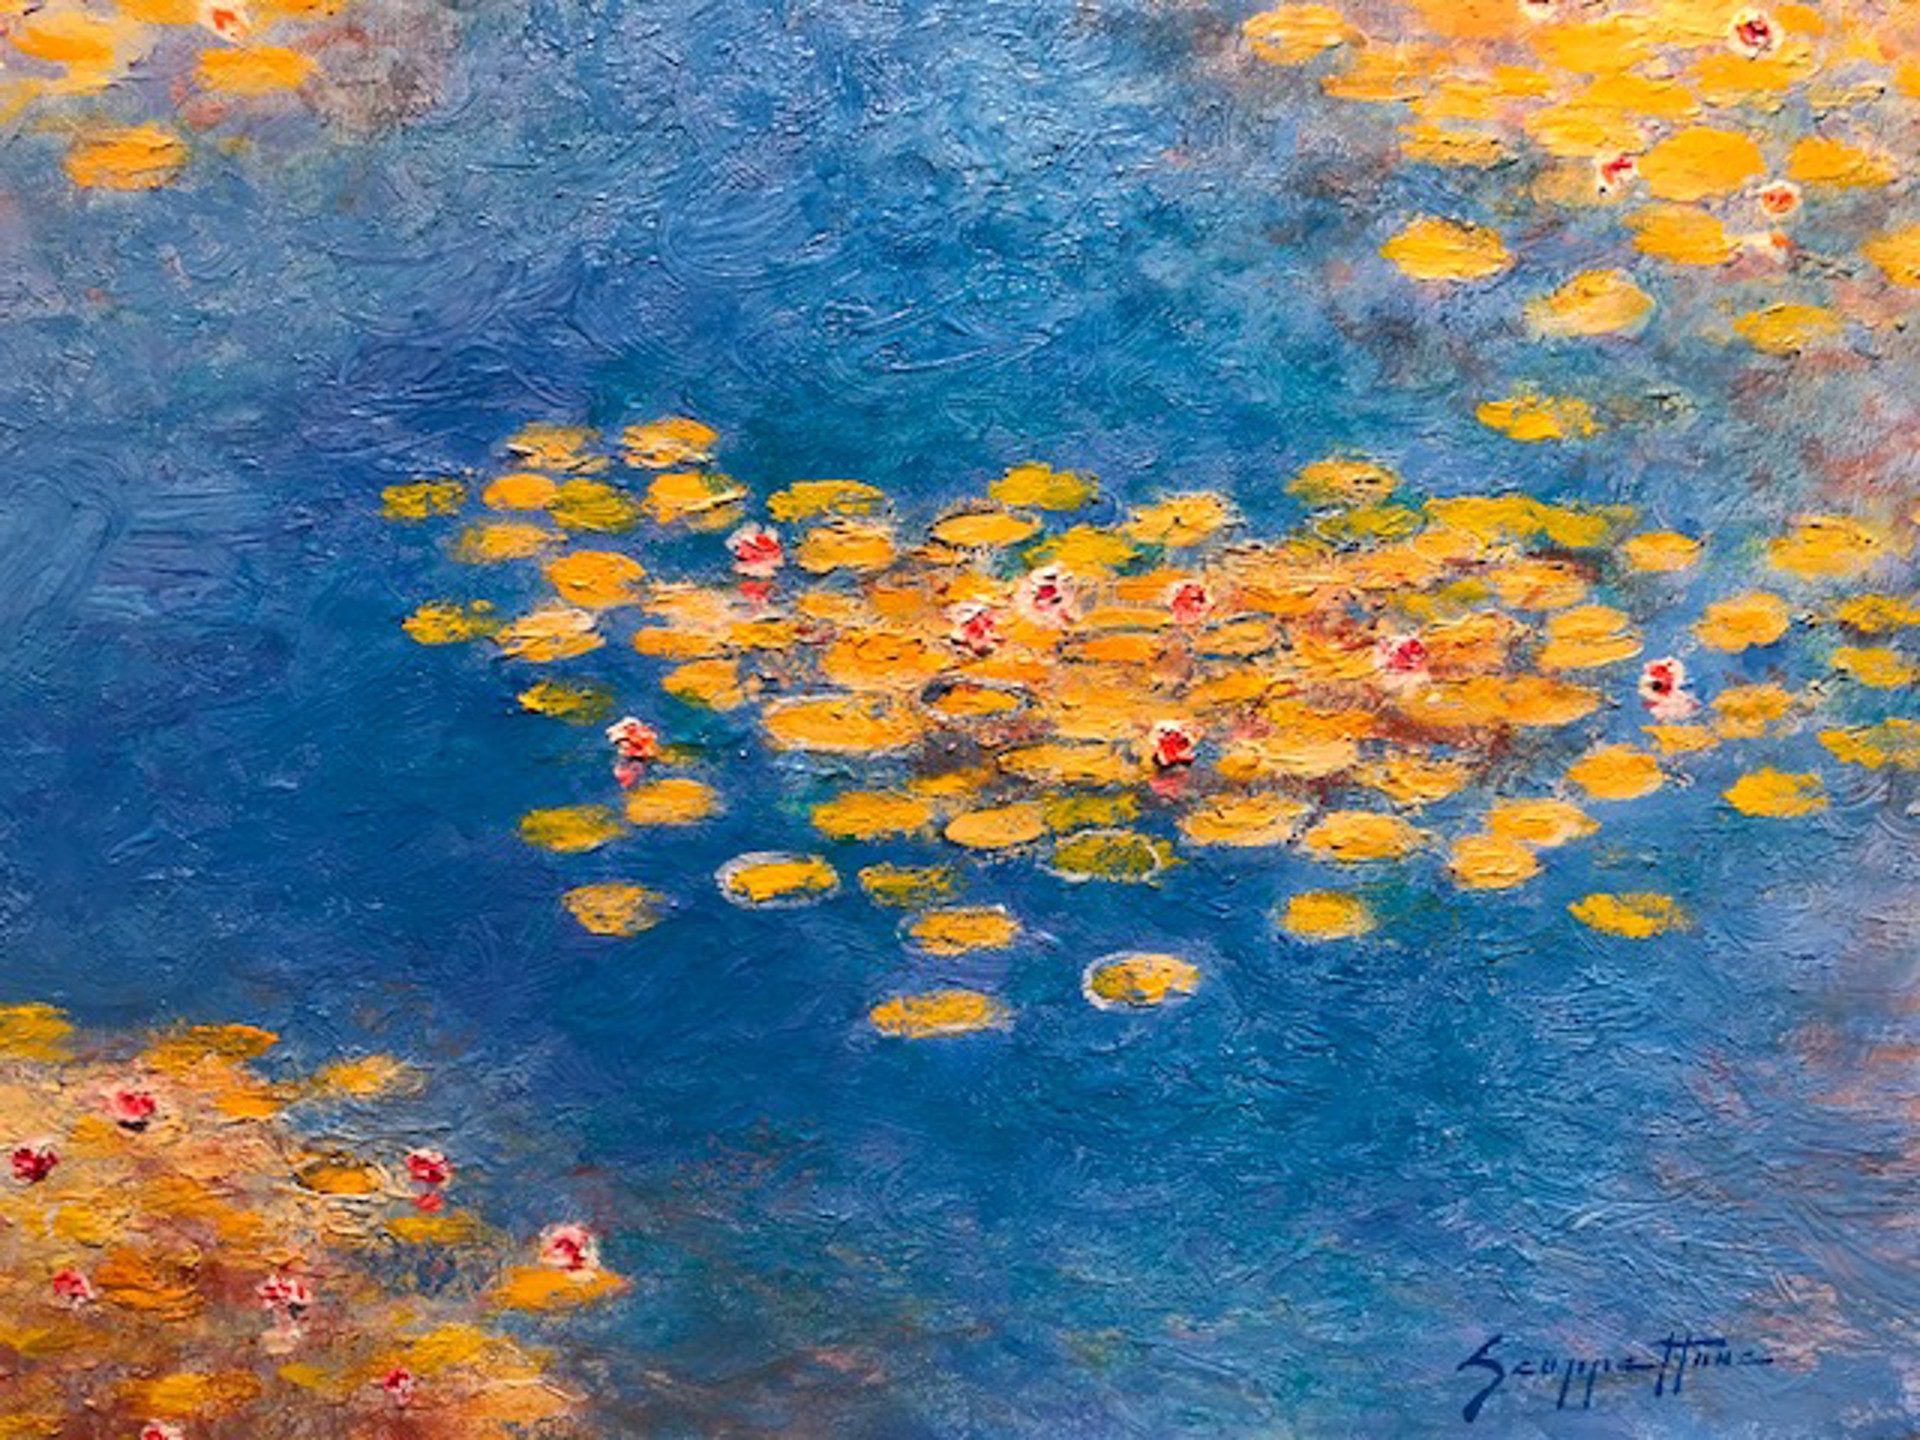 Yellow Flowers on Pond by James Scoppettone